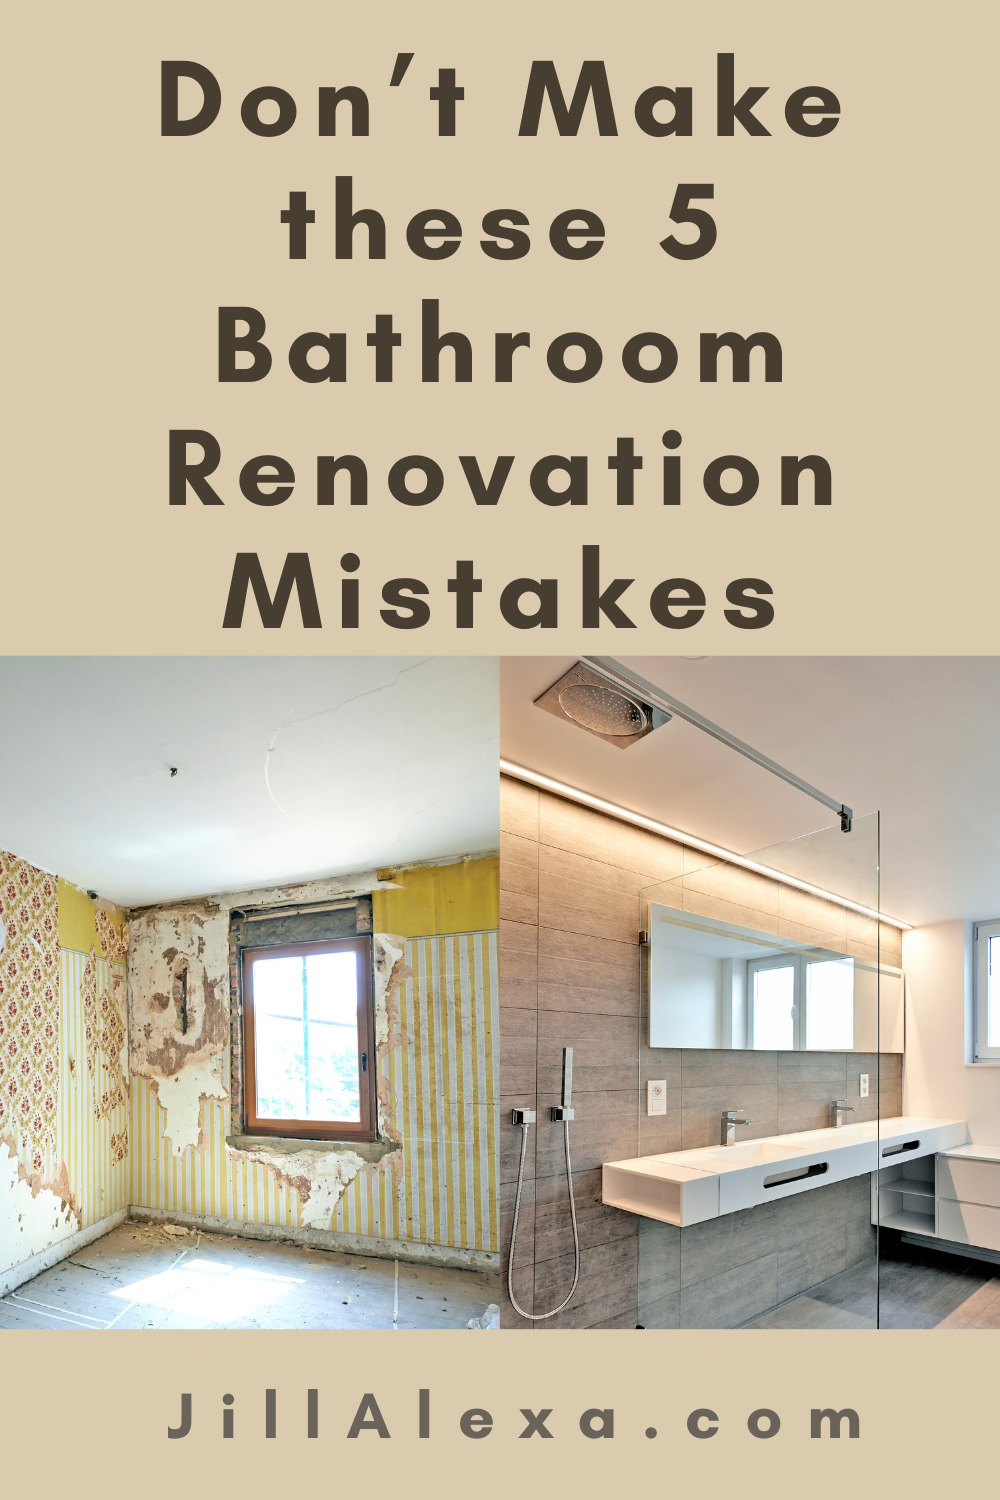 If you want a new bathroom that's the envy of the neighborhood, then we suggest you avoid these 5 classic bathroom renovation mistakes.